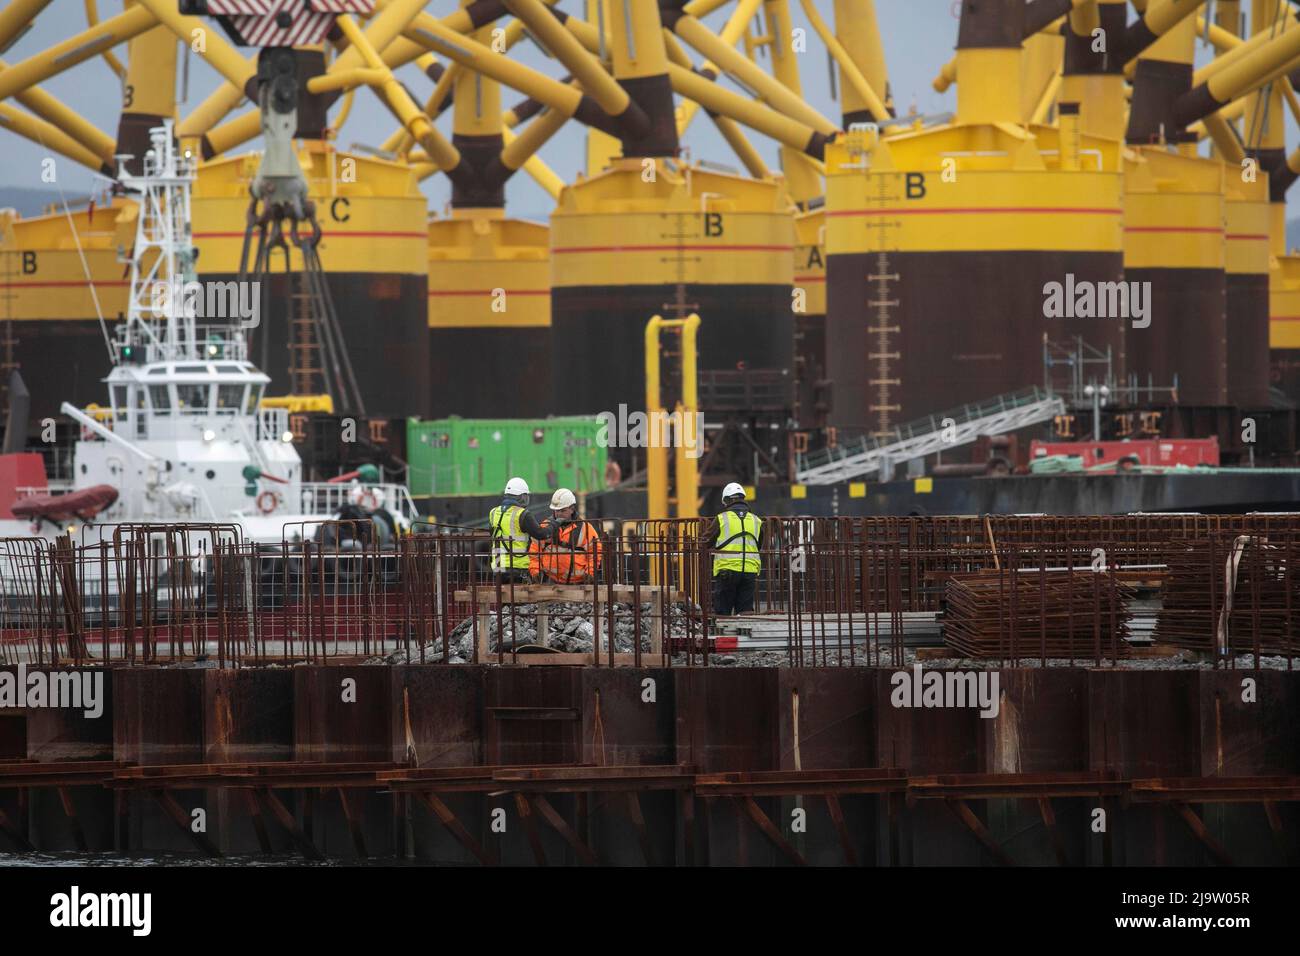 OIL CRISIS.Oil rigs Cromarty Firth, being recommissioned plus wind trubine legs from China . Stock Photo